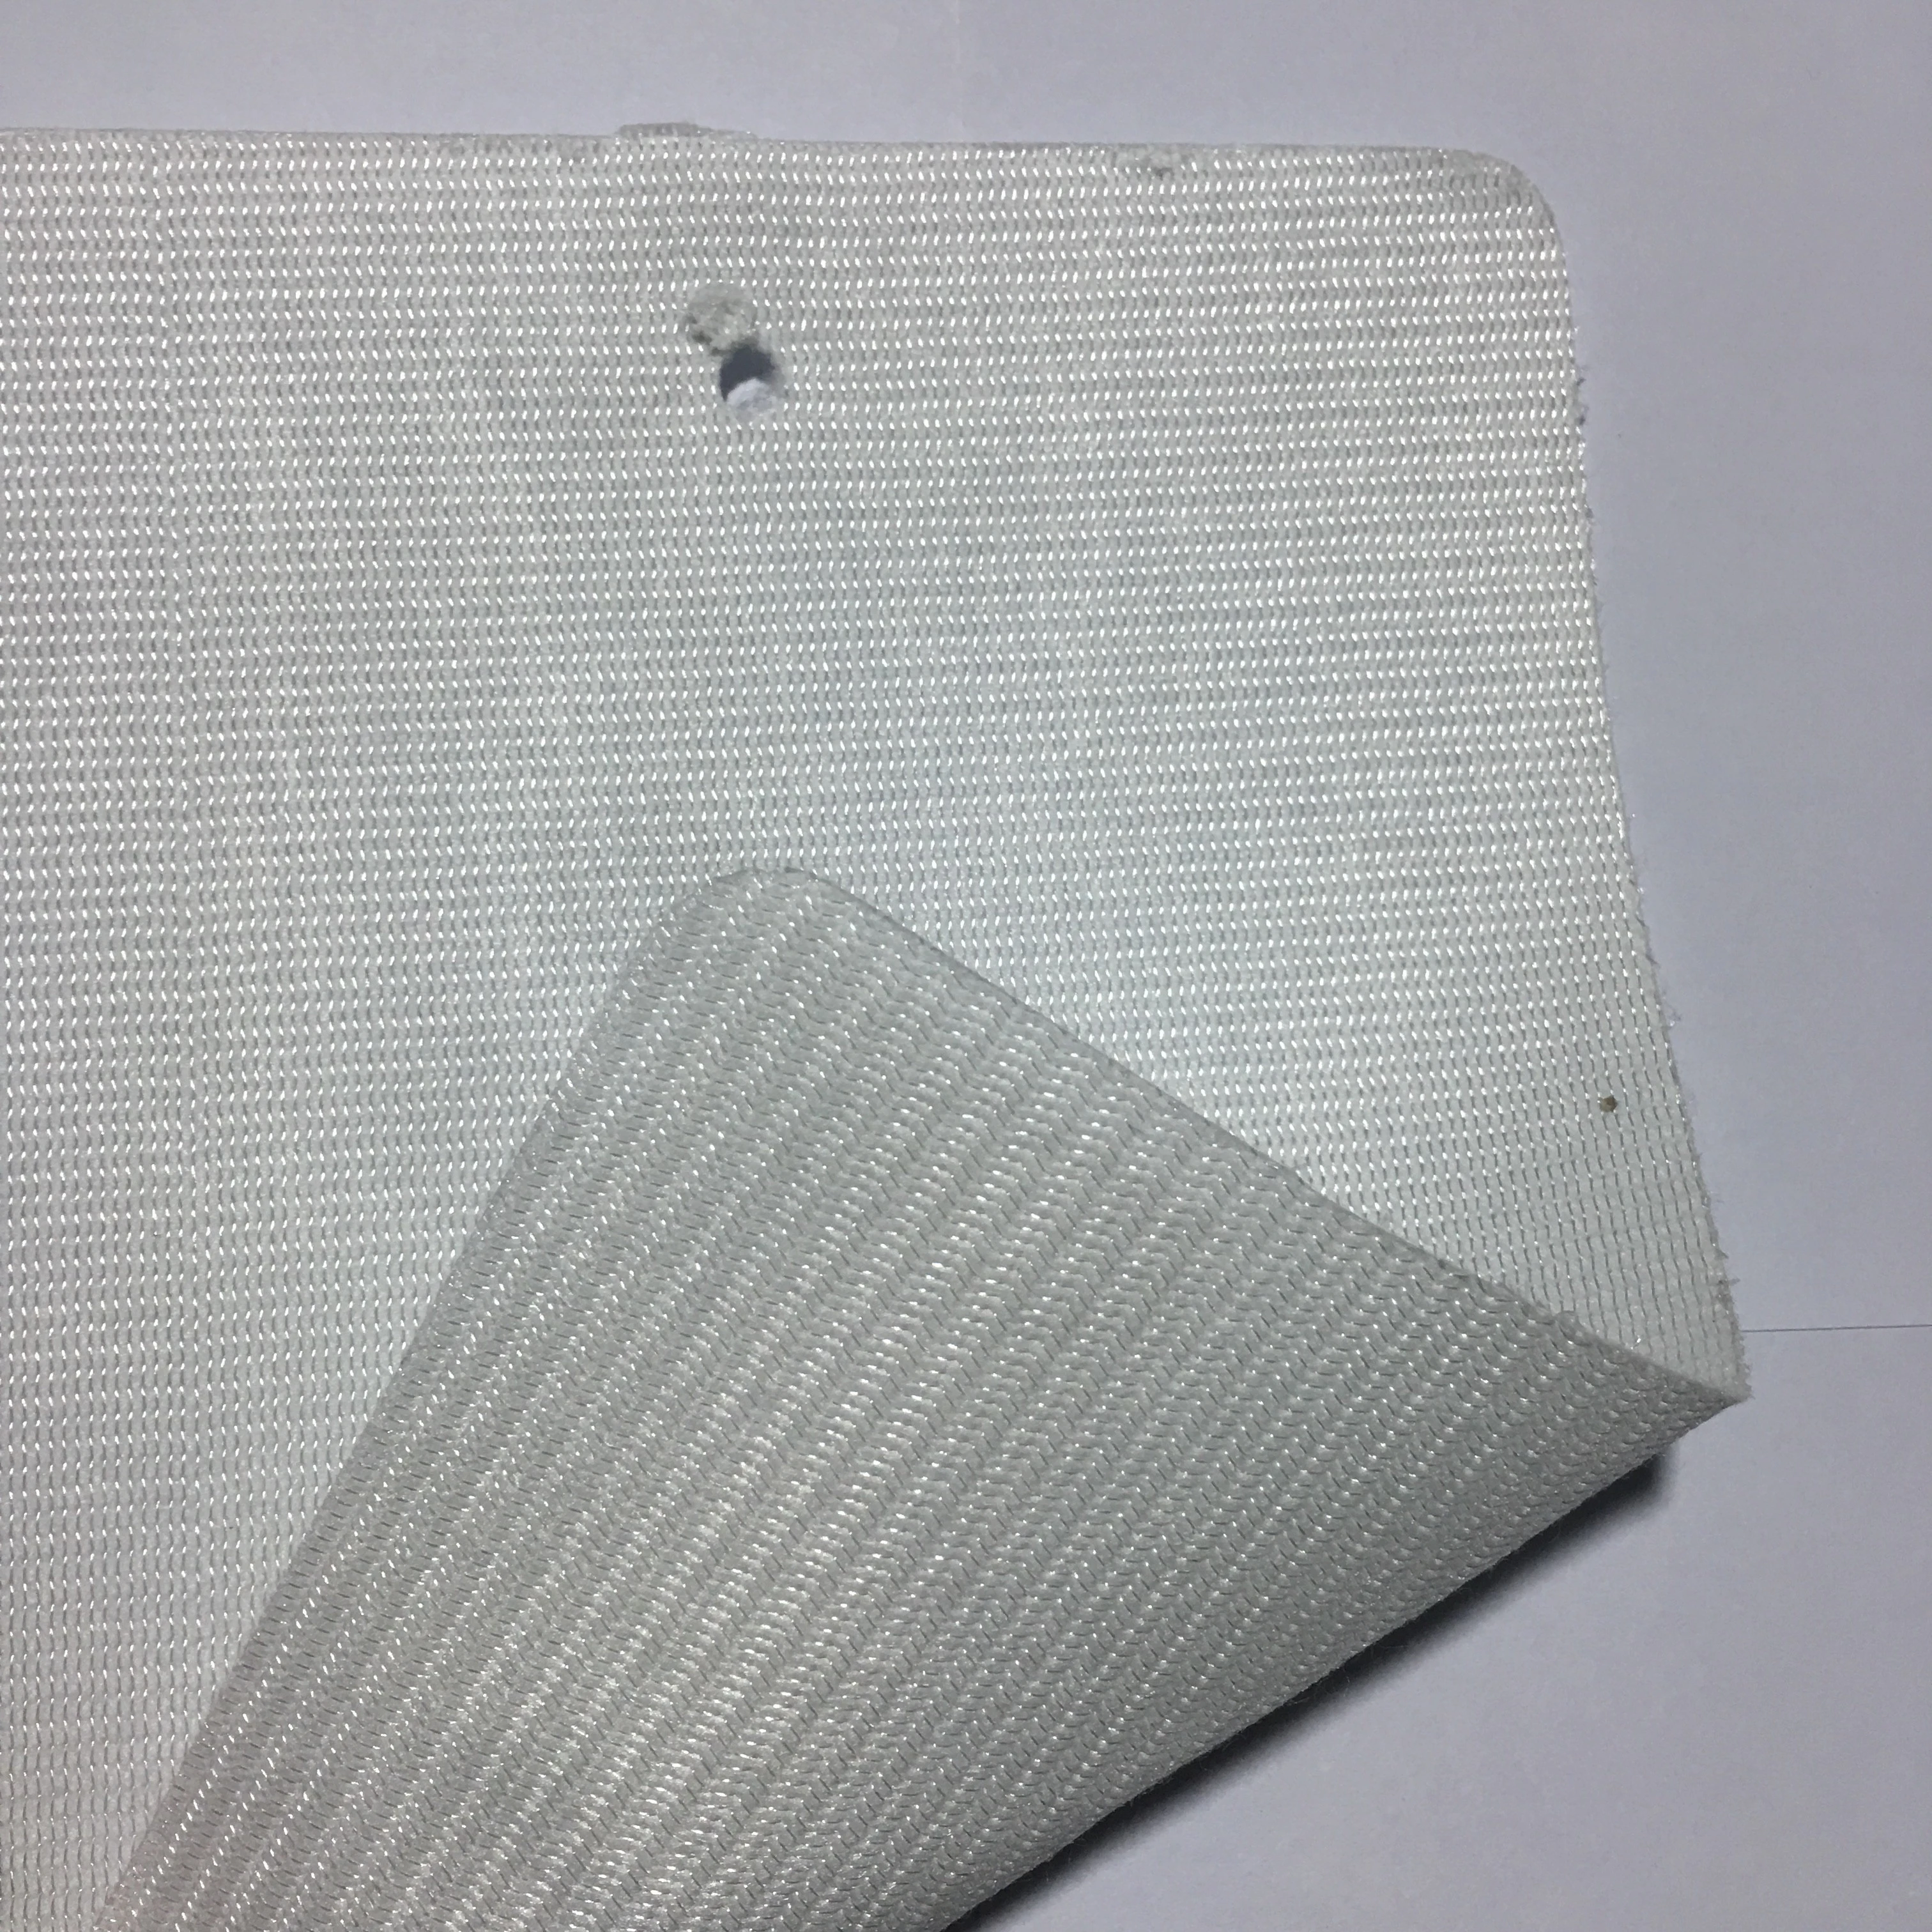 High Quality stitch bonded Waterproof cloth non-woven fabric materials to make shoes